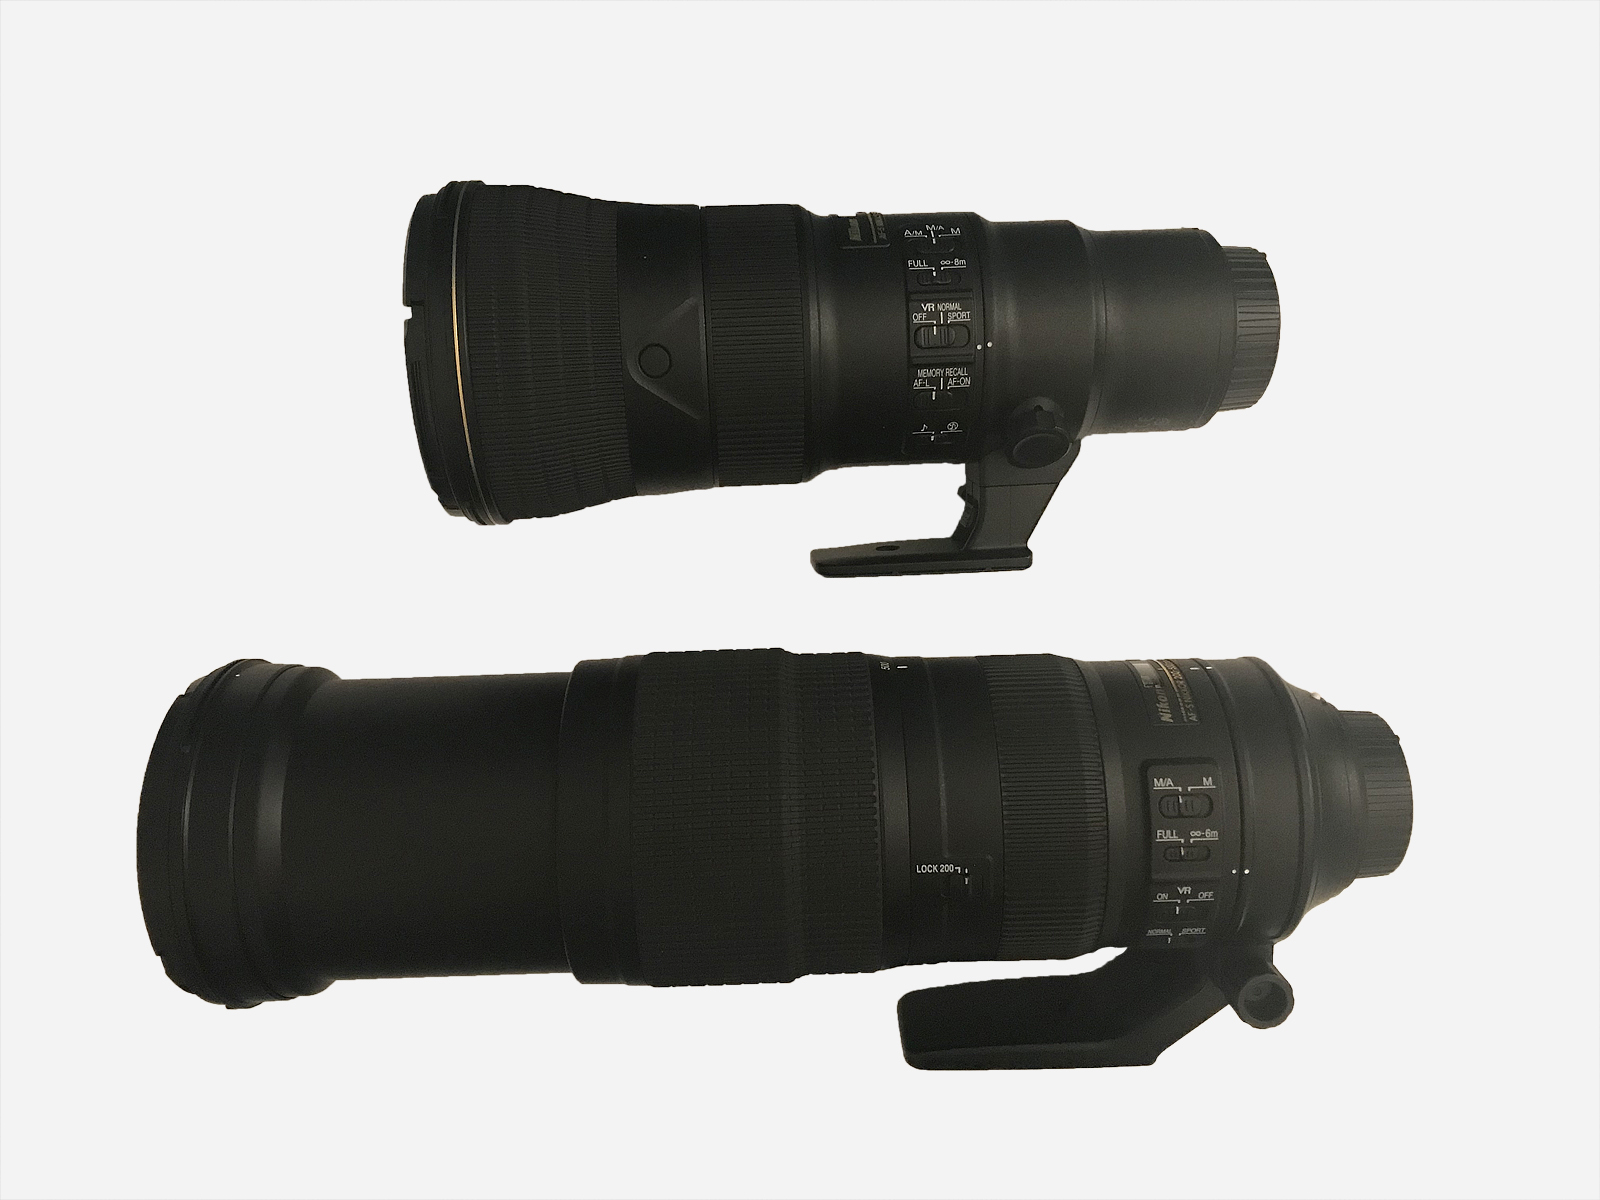 Nikkor AF-S 500mm f/5.6 PF VR field Review – Ari Hazeghi Photography